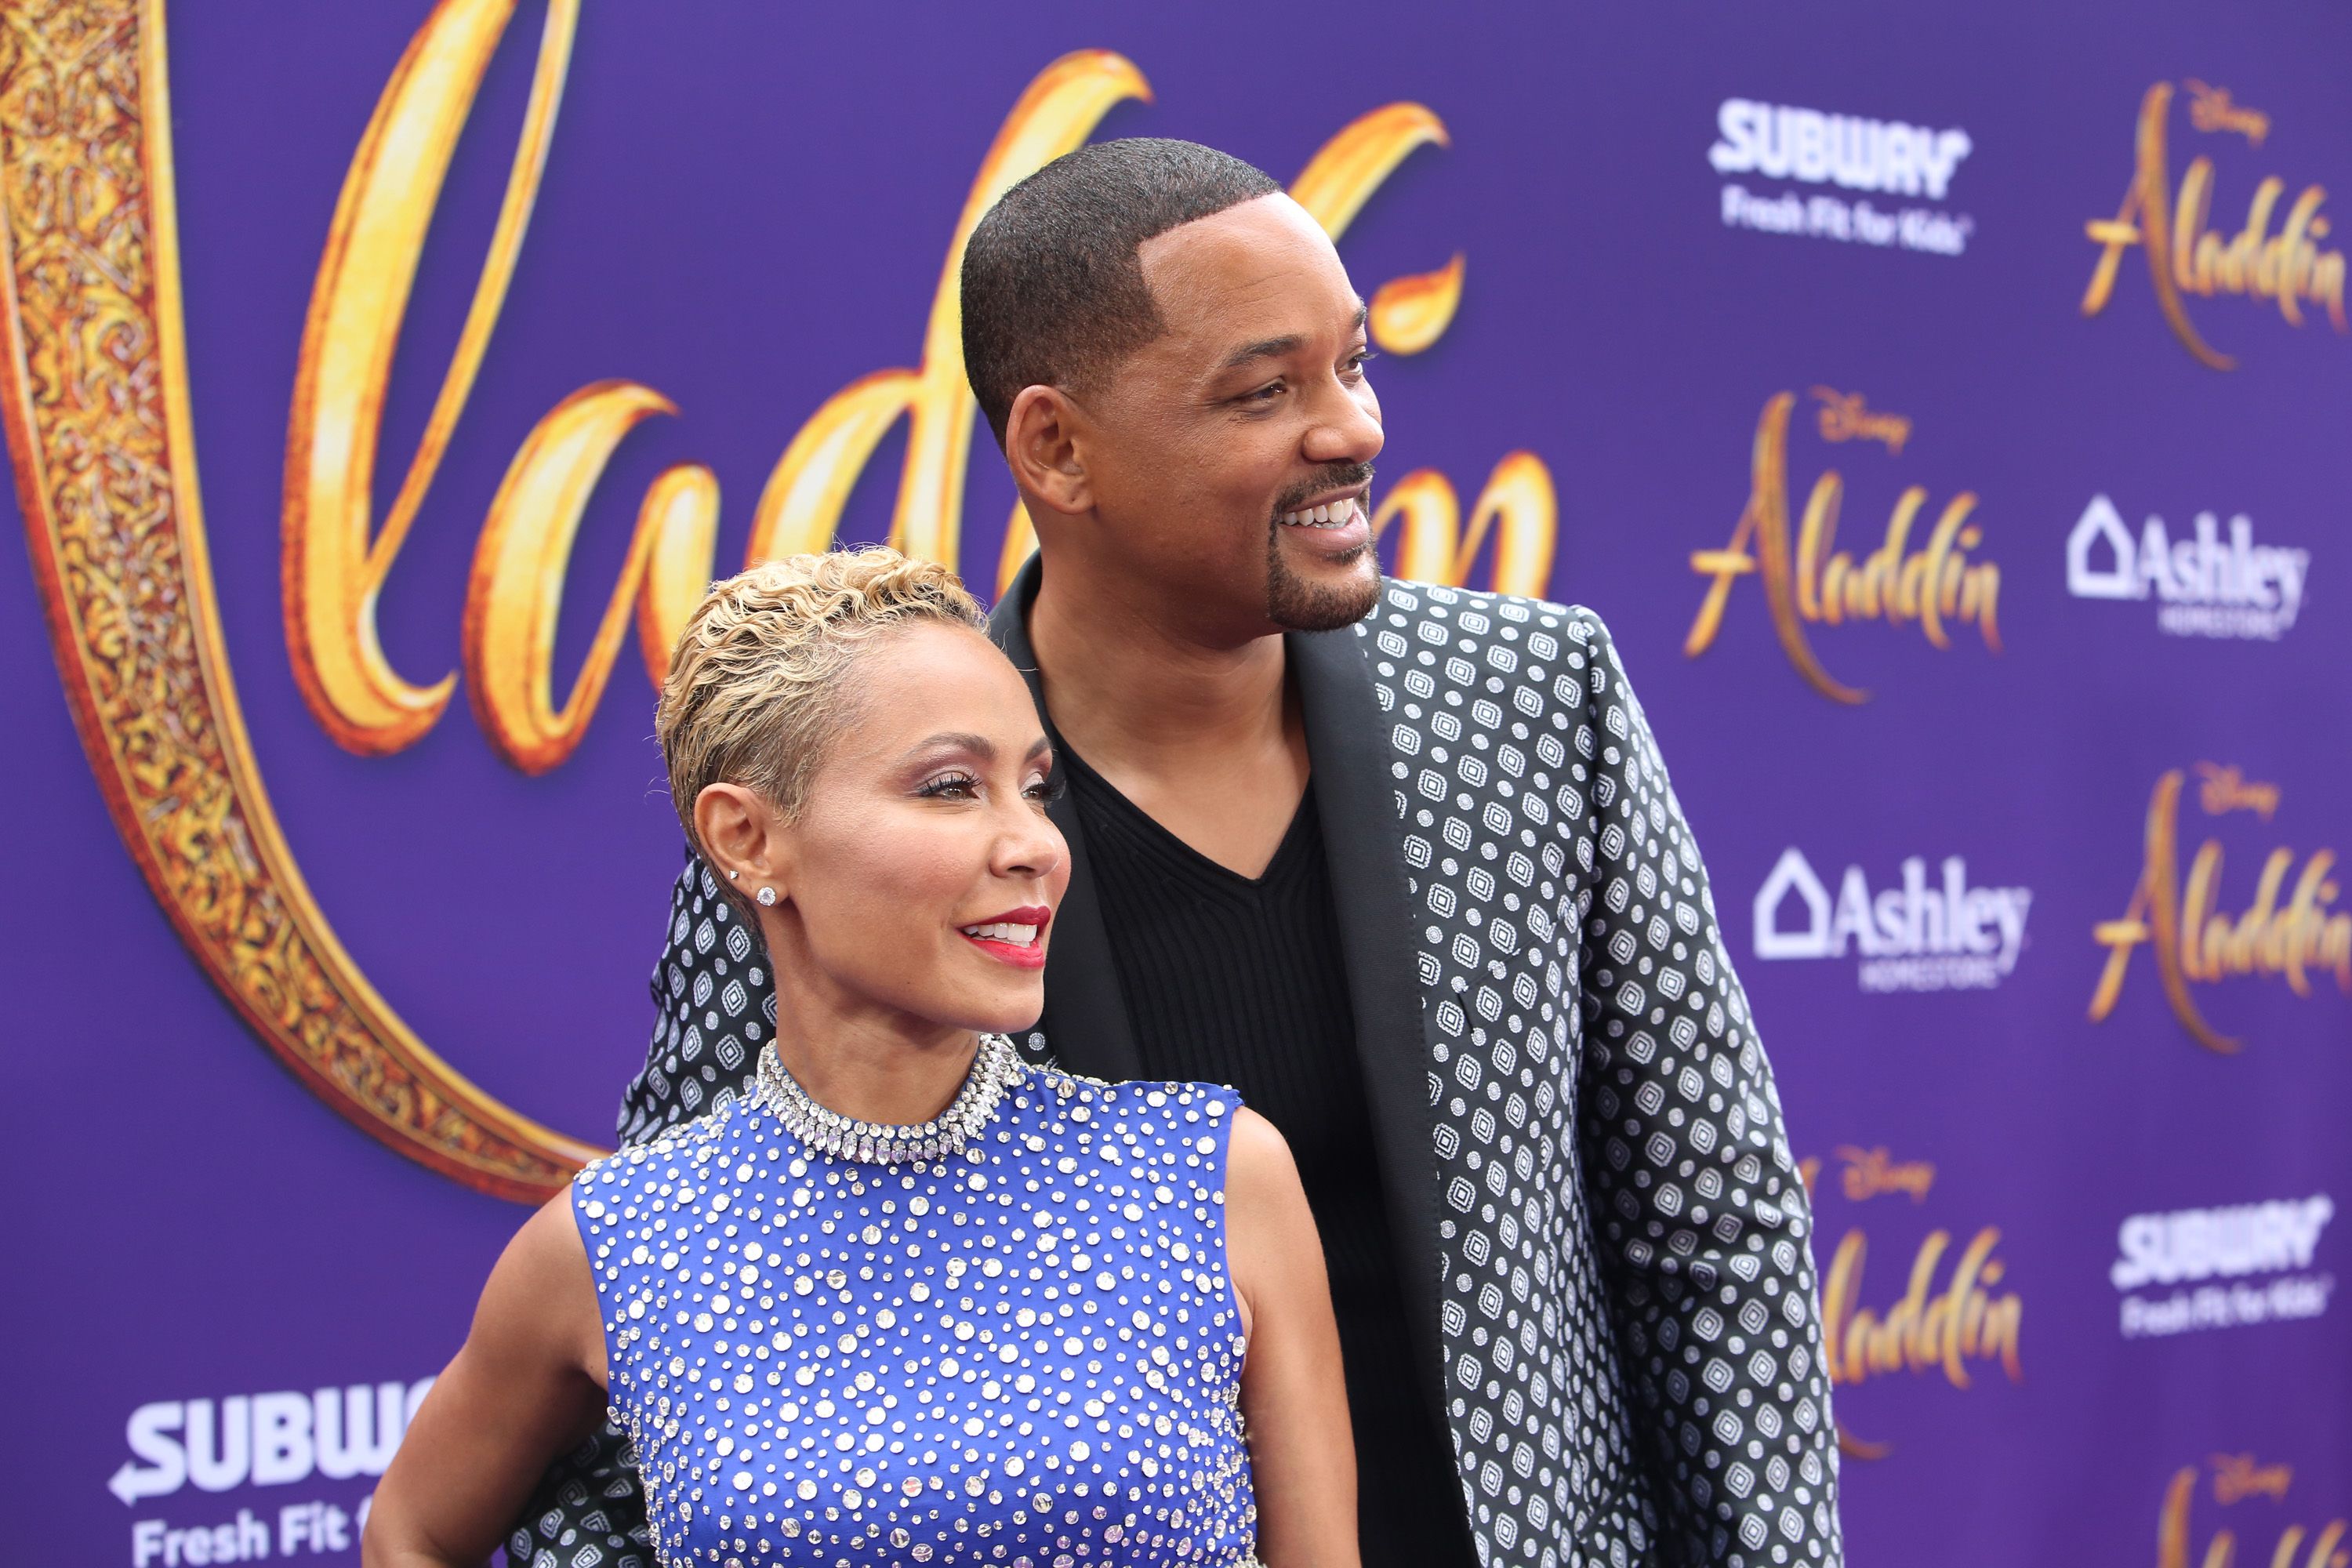 Jada Pinkett Smith and Will Smith attend the World Premiere of Disneys "Aladdin" at the El Capitan Theater in Hollywood CA on May 21, 2019. | Photo: Getty Images